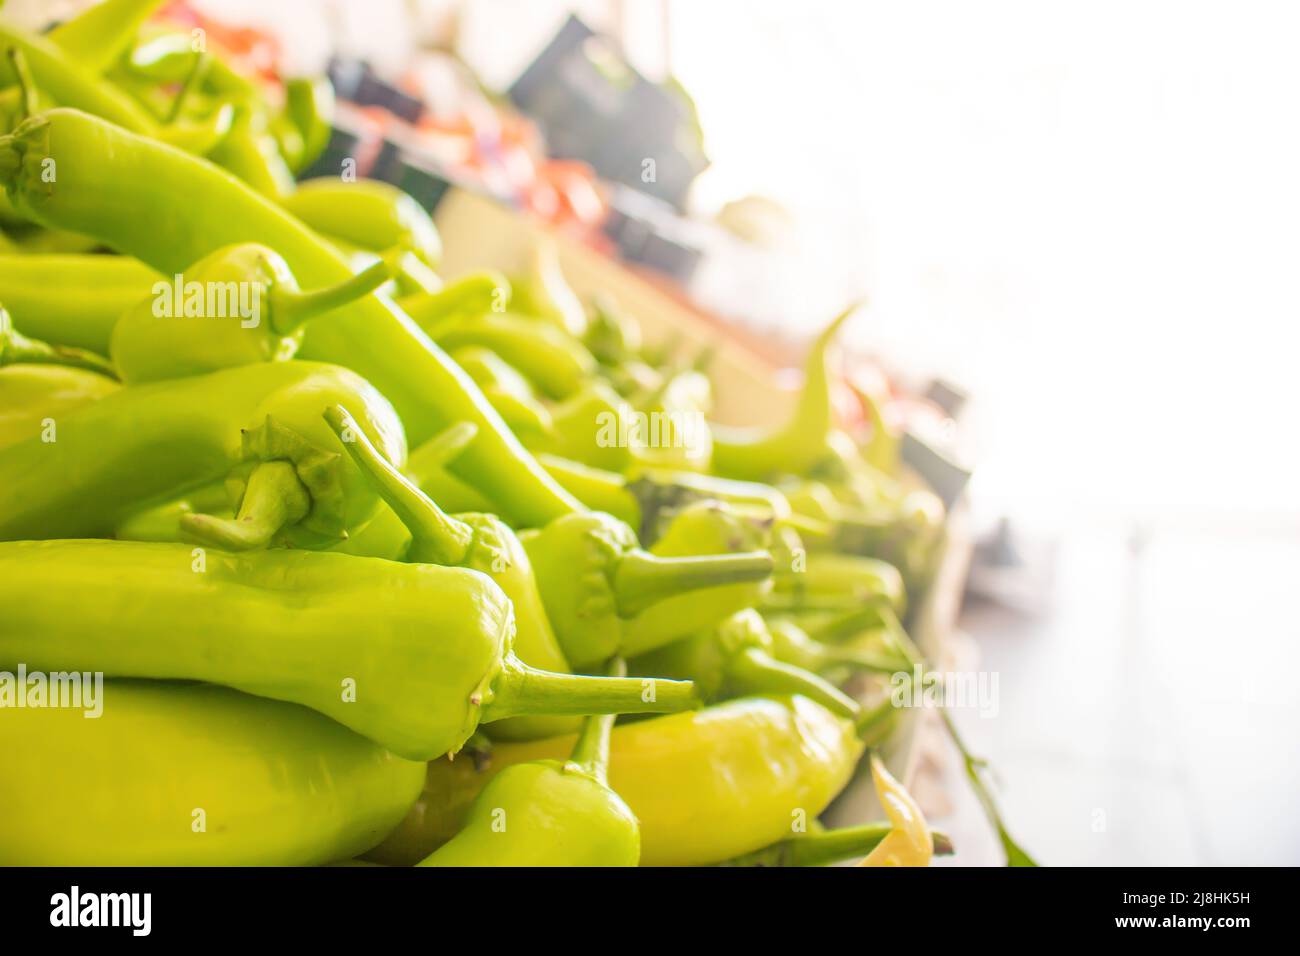 Fresh green pepper in the grocery store stall with sunlight, copy space bokeh background. Bunch of market stalls, selective focus close-up. Stock Photo